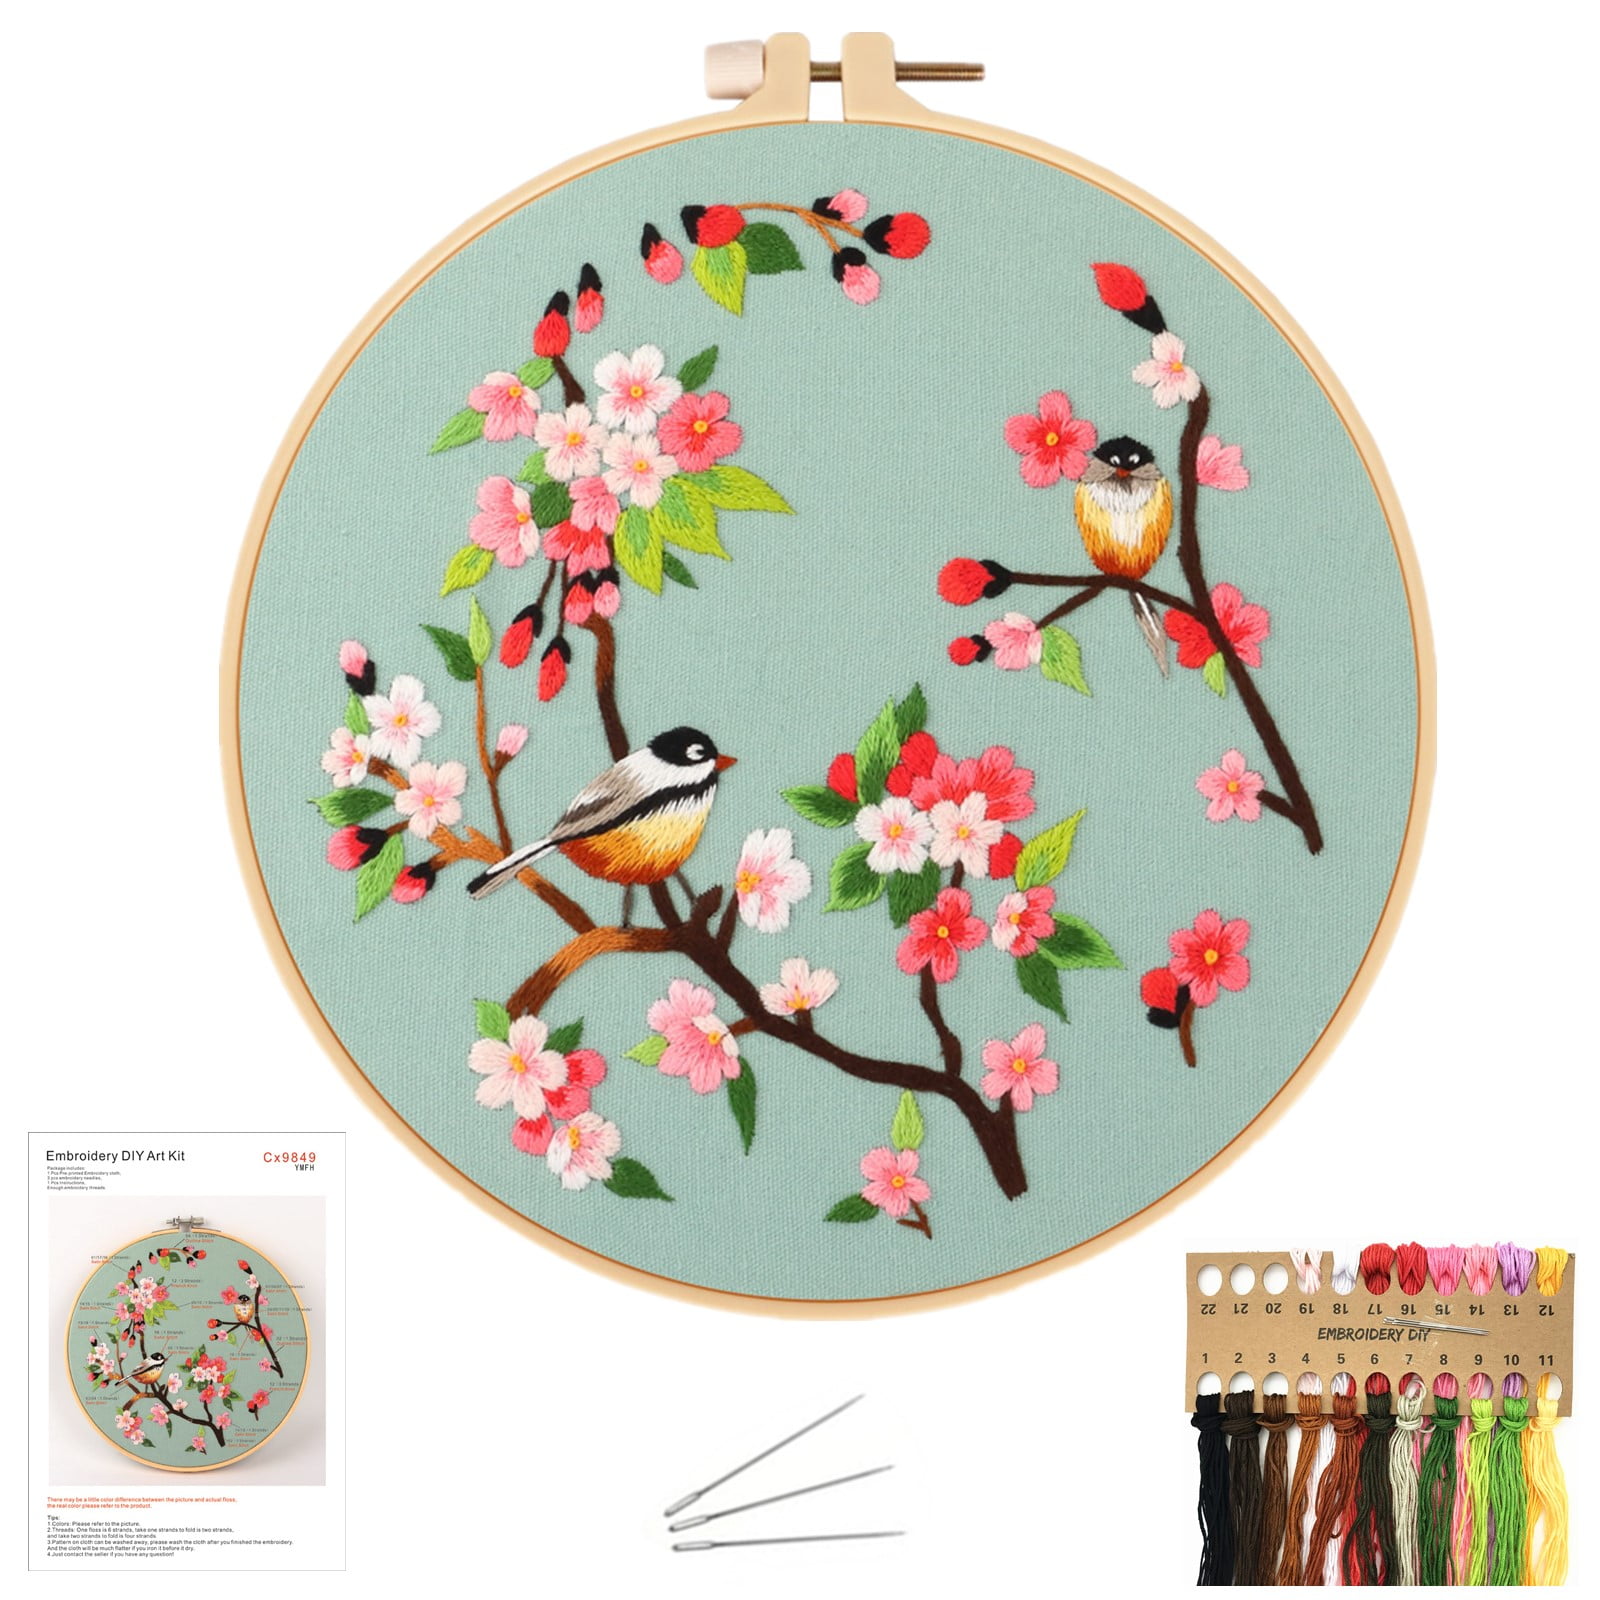 Easy Cross Stitch Kit showing a Christmas Gift, with 3 (7.7cm) Hoop.